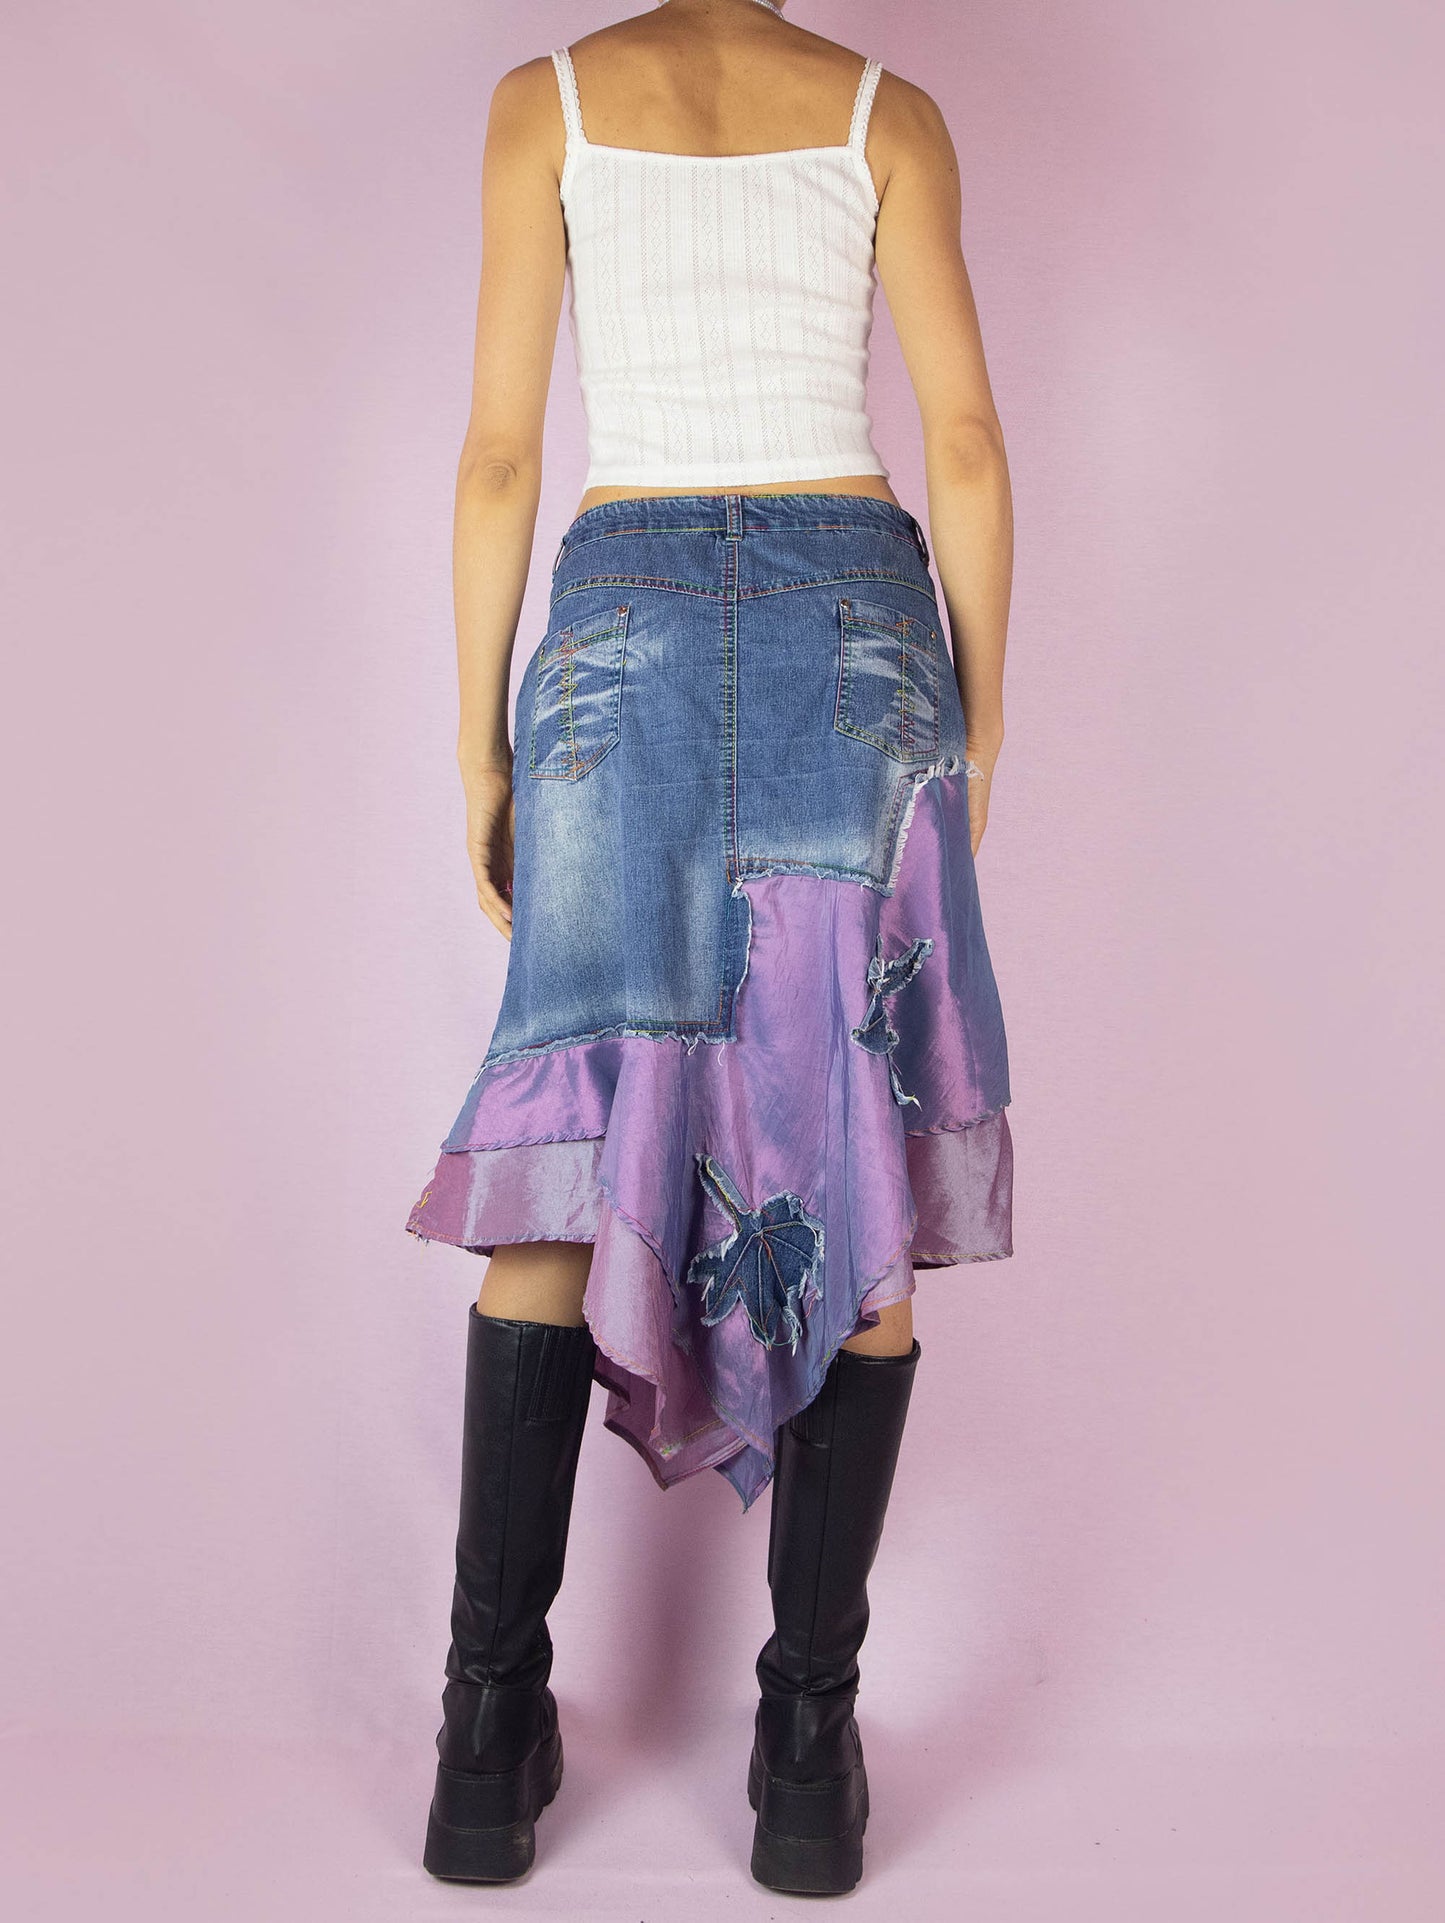 The Y2K Denim Asymmetric Trumpet Skirt is a vintage 2000s slightly stretchy jean midi skirt, avant-garde and deconstructed, with applique and acid wash details, a layered pointed hem, pockets, and a zipper closure.